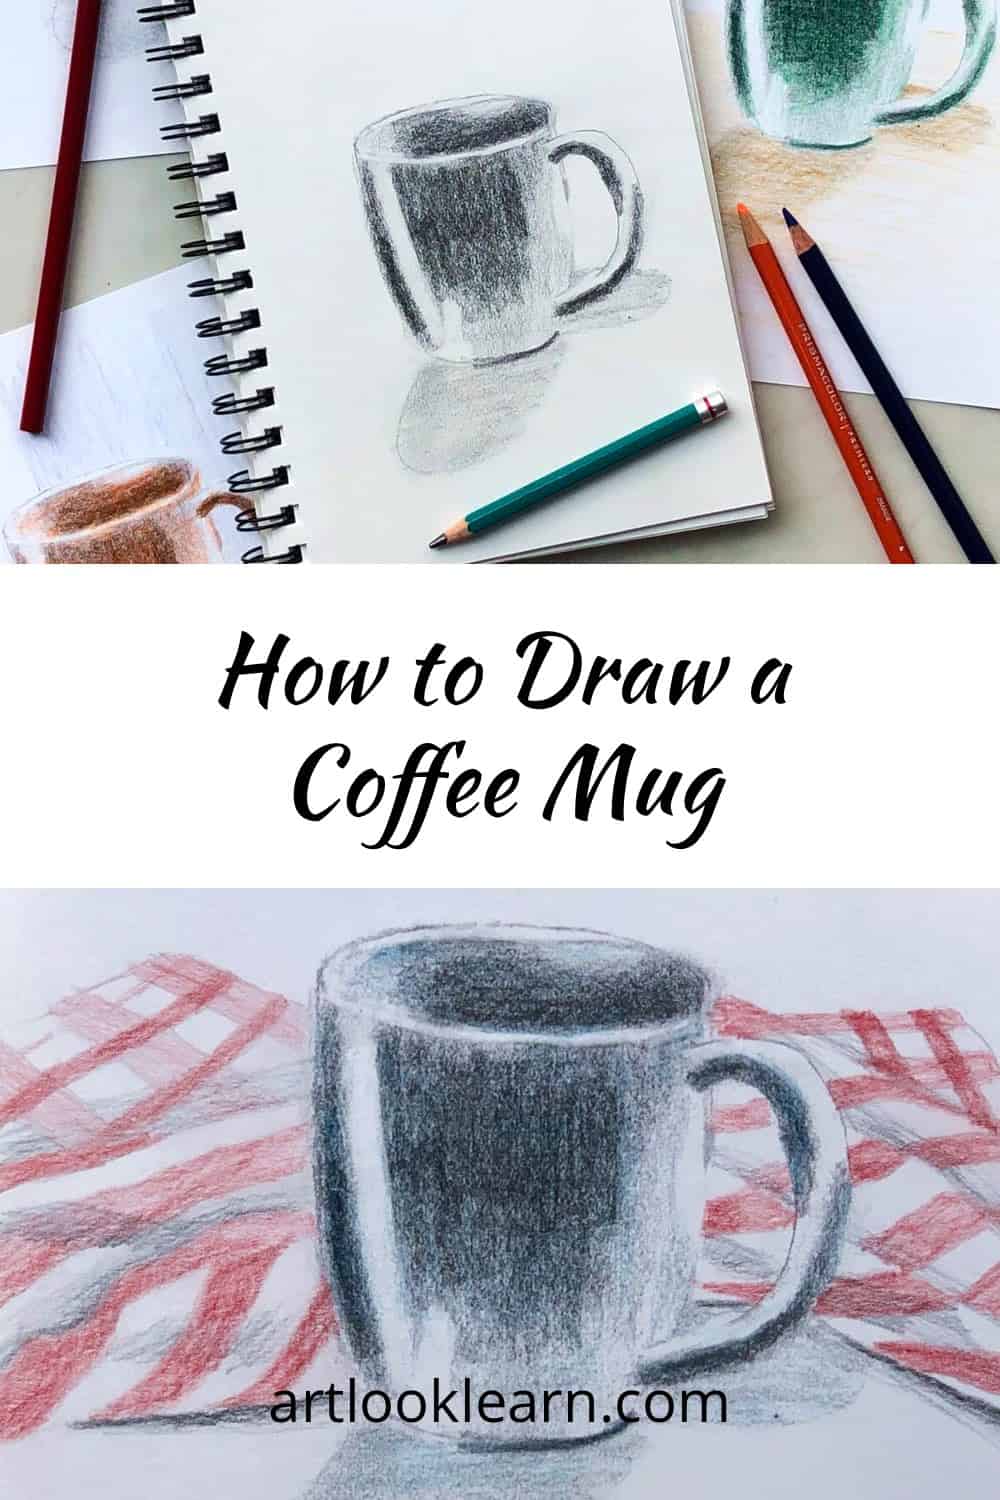 How to Draw a Cup Easy - It's Important - YouTube